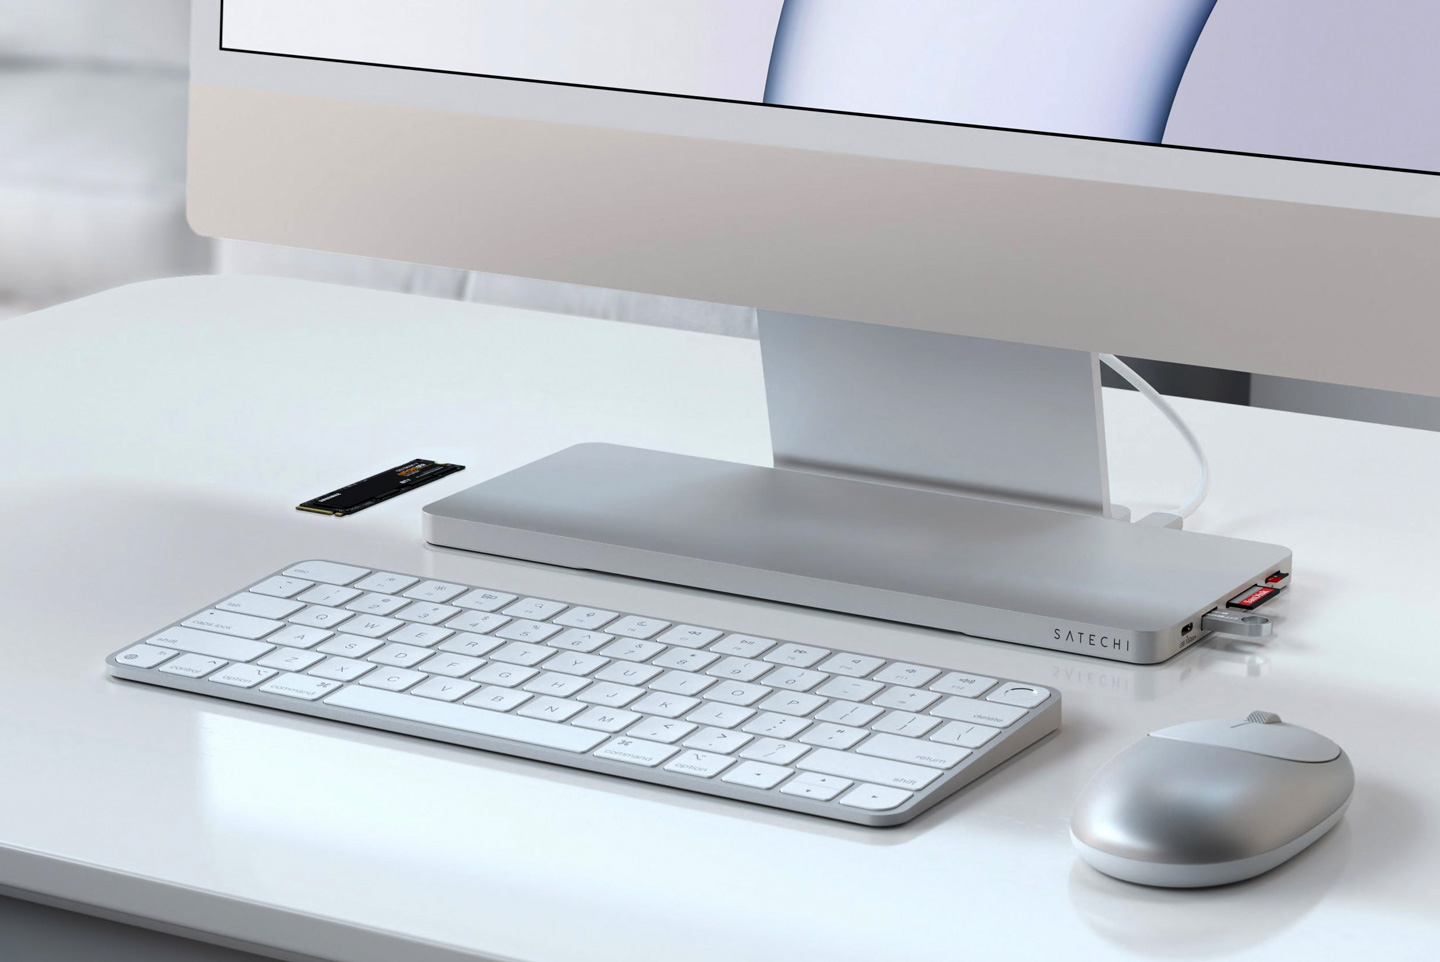 #The Satechi Slim Dock sits perfectly on your Apple iMac’s base, giving you extra storage and ports